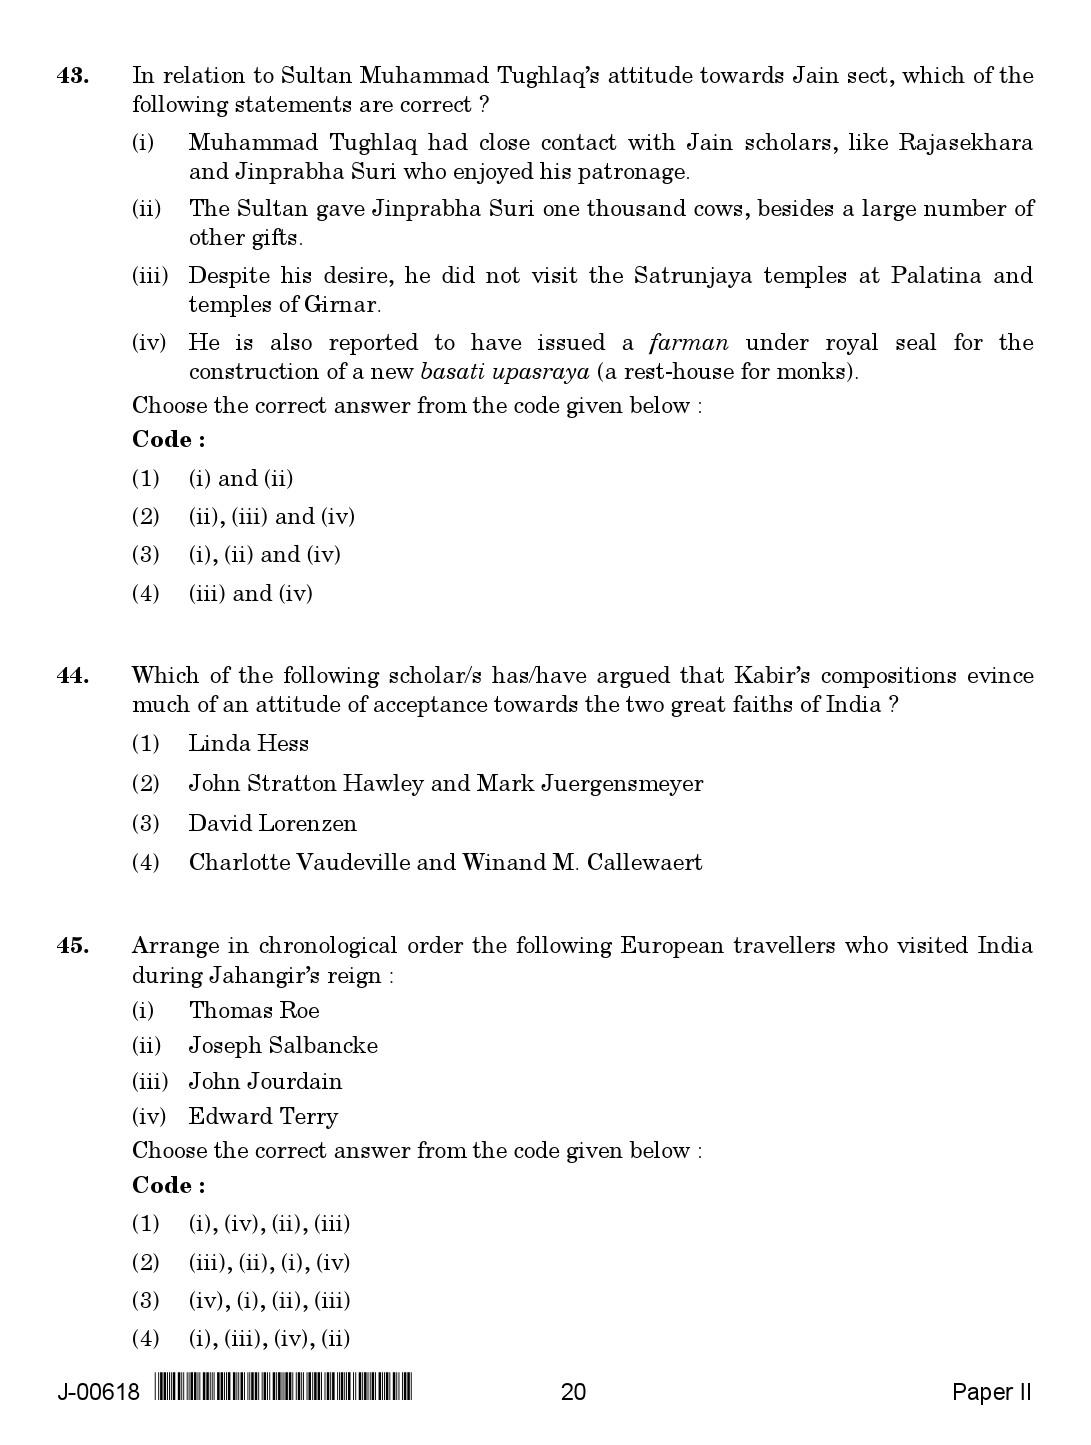 History Question Paper II July 2018 in English 2nd Exam 11